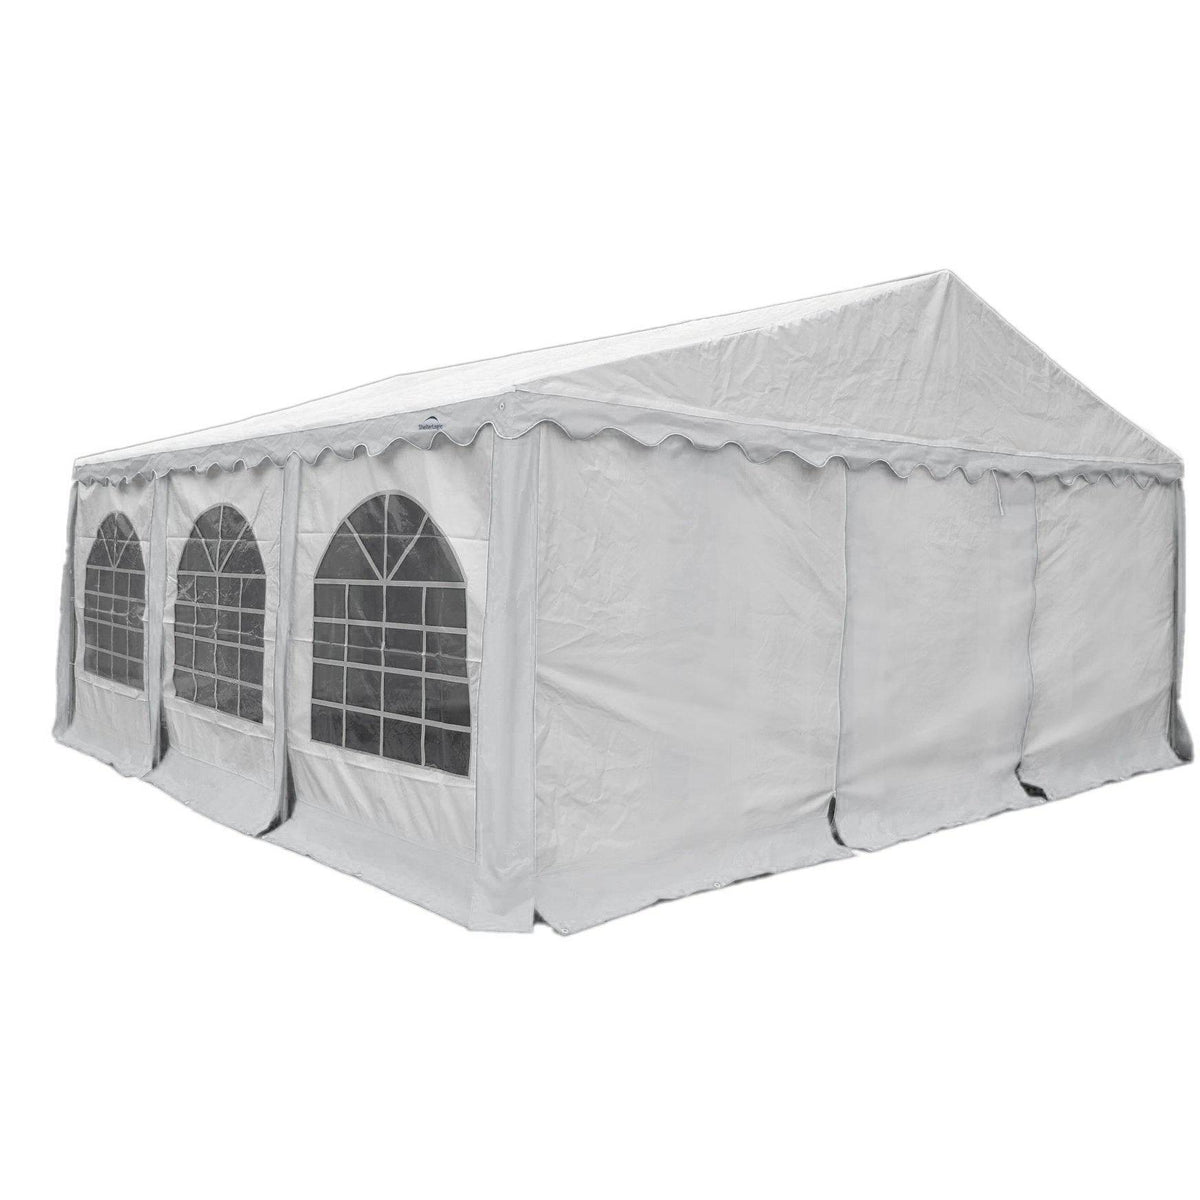 ShelterLogic Enclosure Kit with Windows, White, 20 x 20 ft. (Party Tent Cover and Frame Sold Separately)